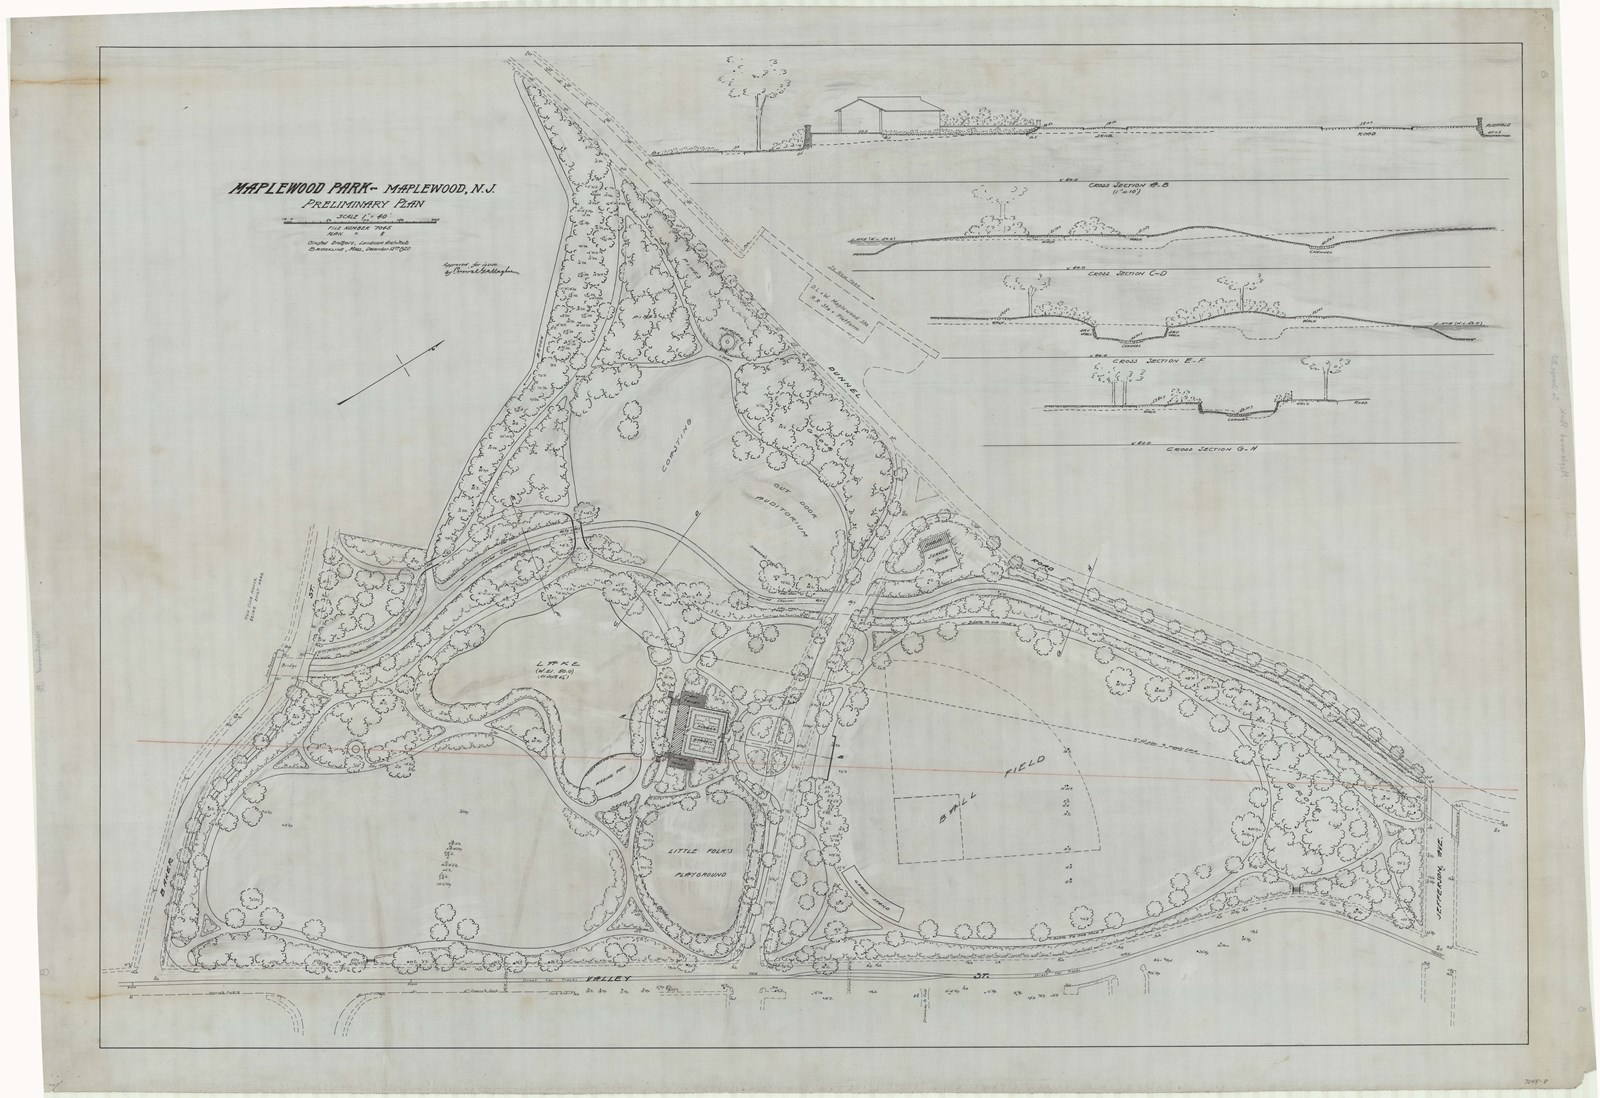 Pencil drawing of triangular park with three open spaces, many paths and trees all over